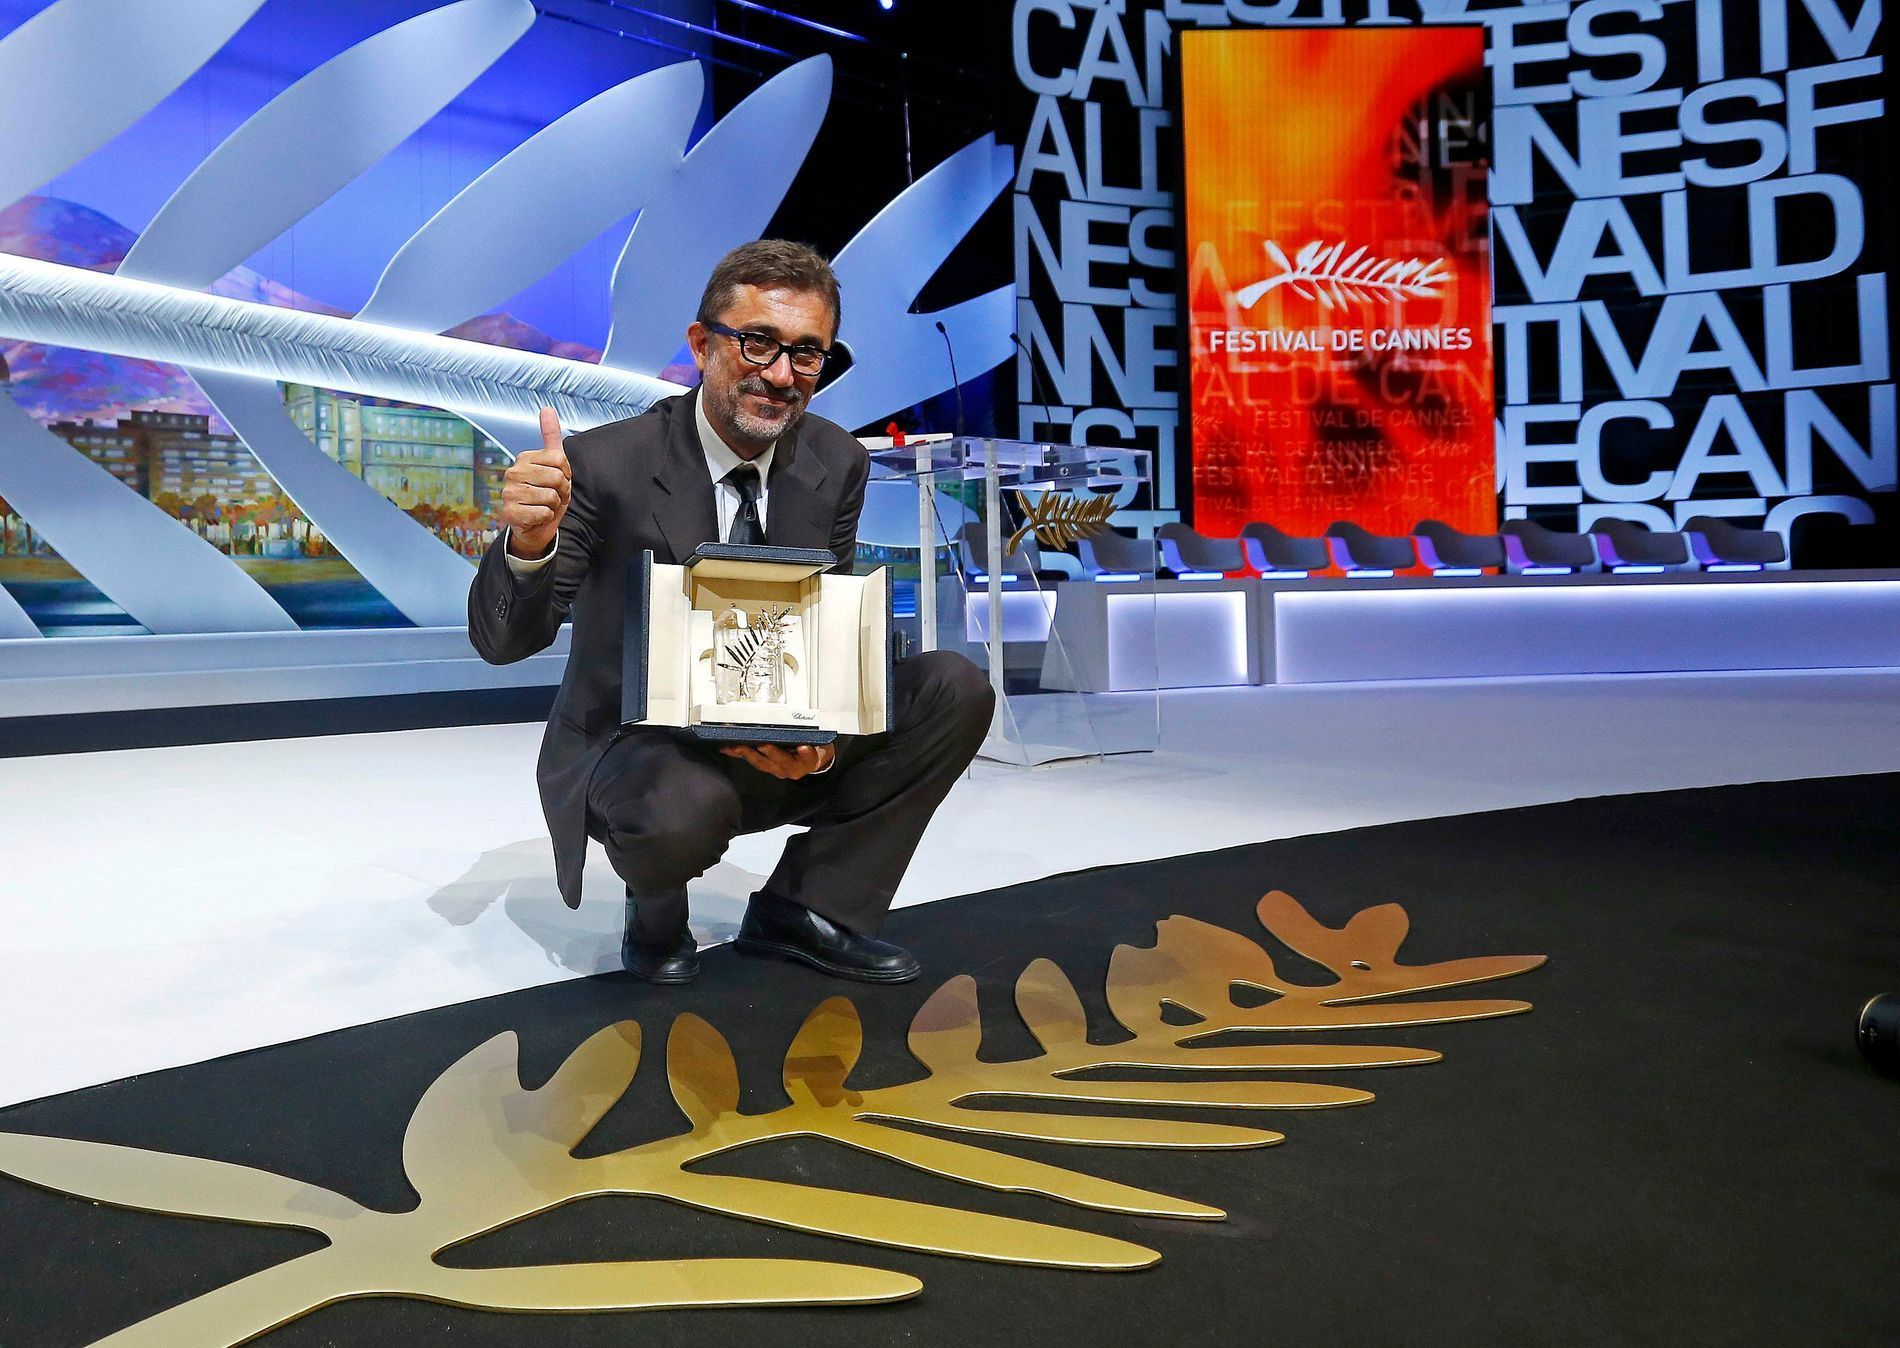 Director Nuri Bilge Ceylan, Palme d'Or award winner for his film &quot;Winter Sleep&quot;, poses on stage during the closing ceremony of the 67th Cannes Film Festival in Cannes